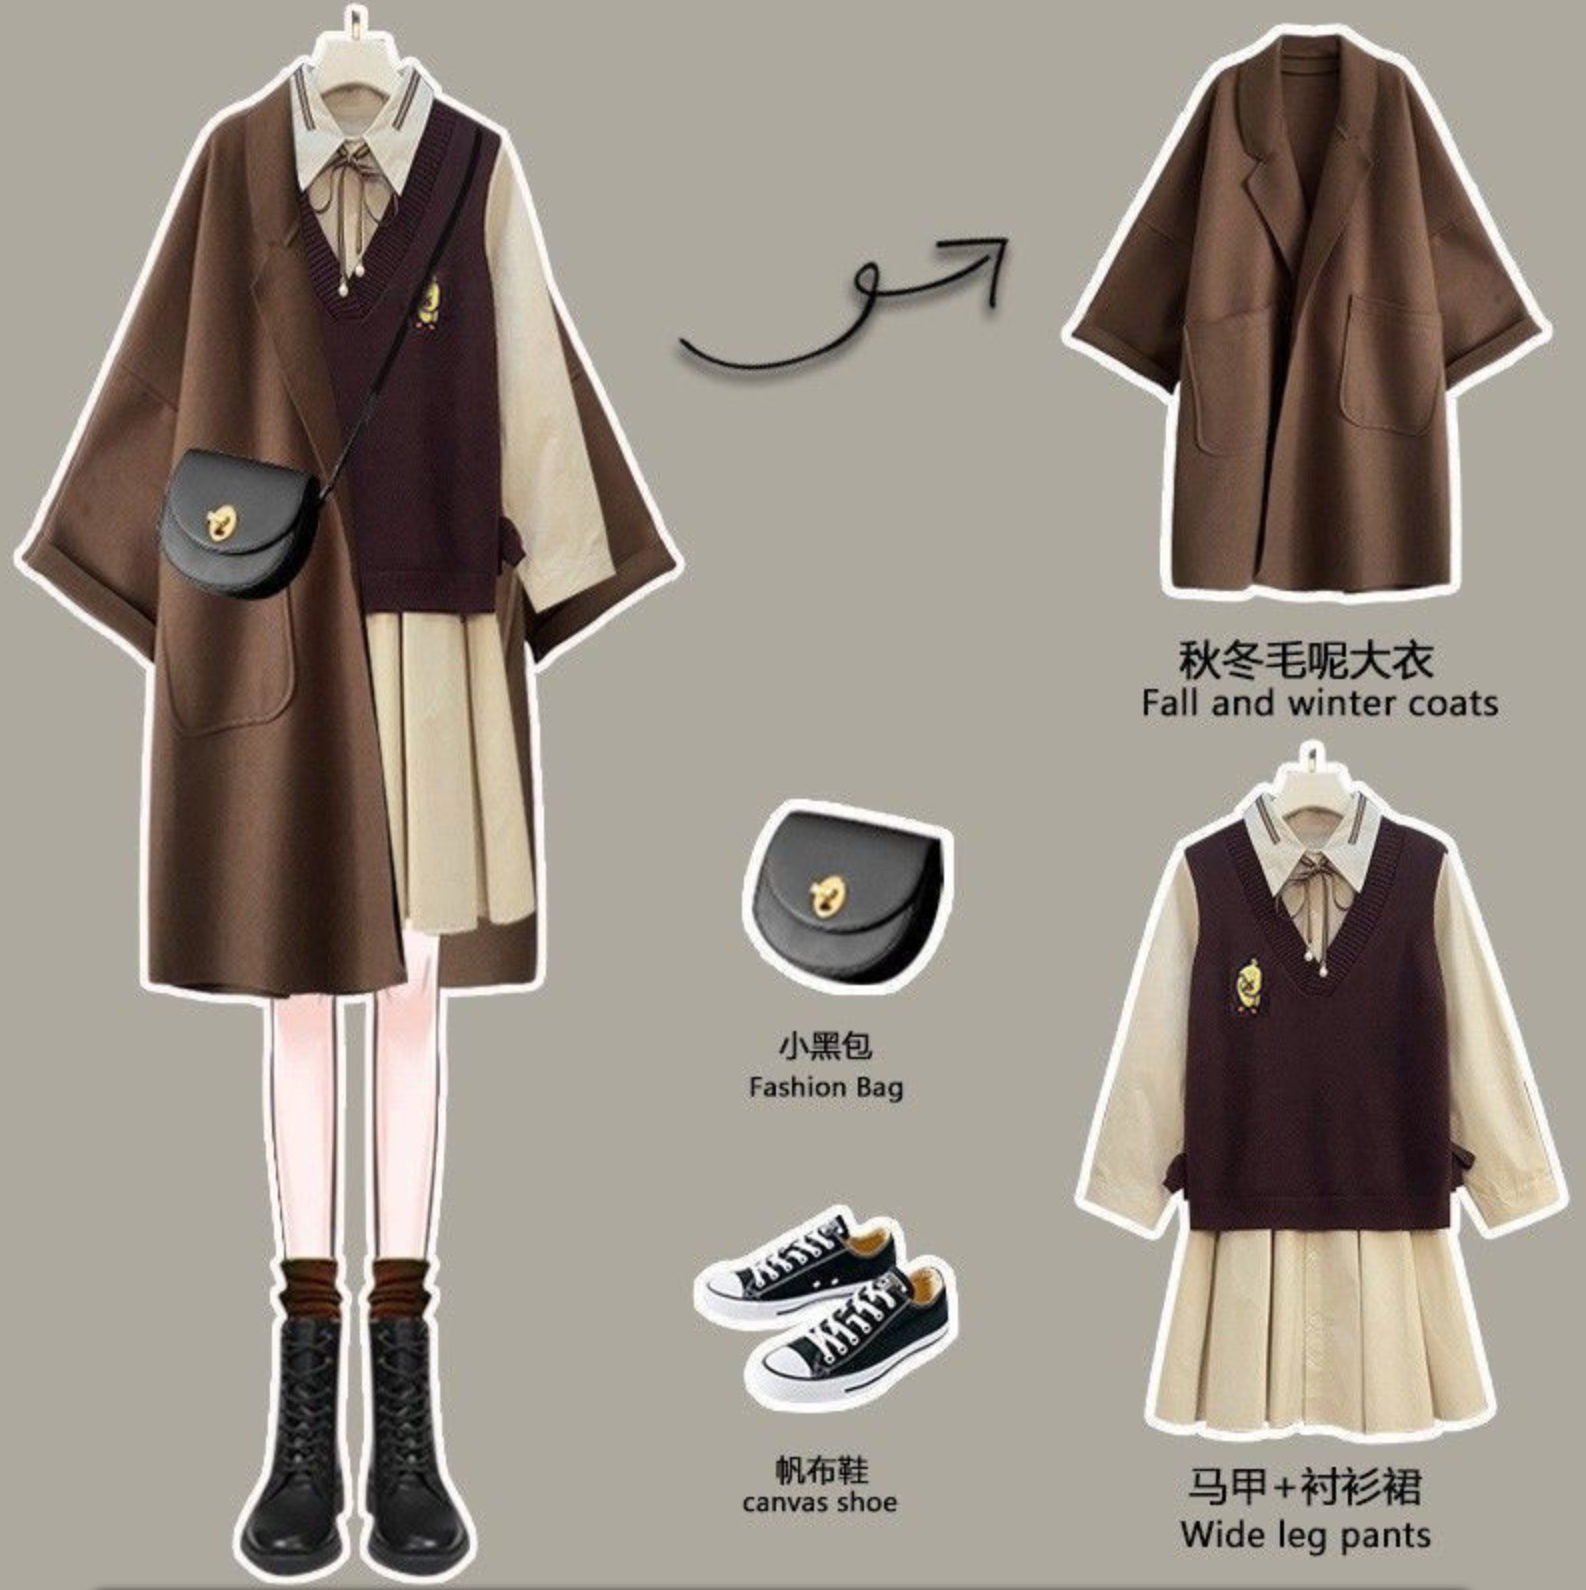 Nightingale - Dark Academia Retro Woolen Jacket With Vest And Shirt Outfit - TheDarkAcademic